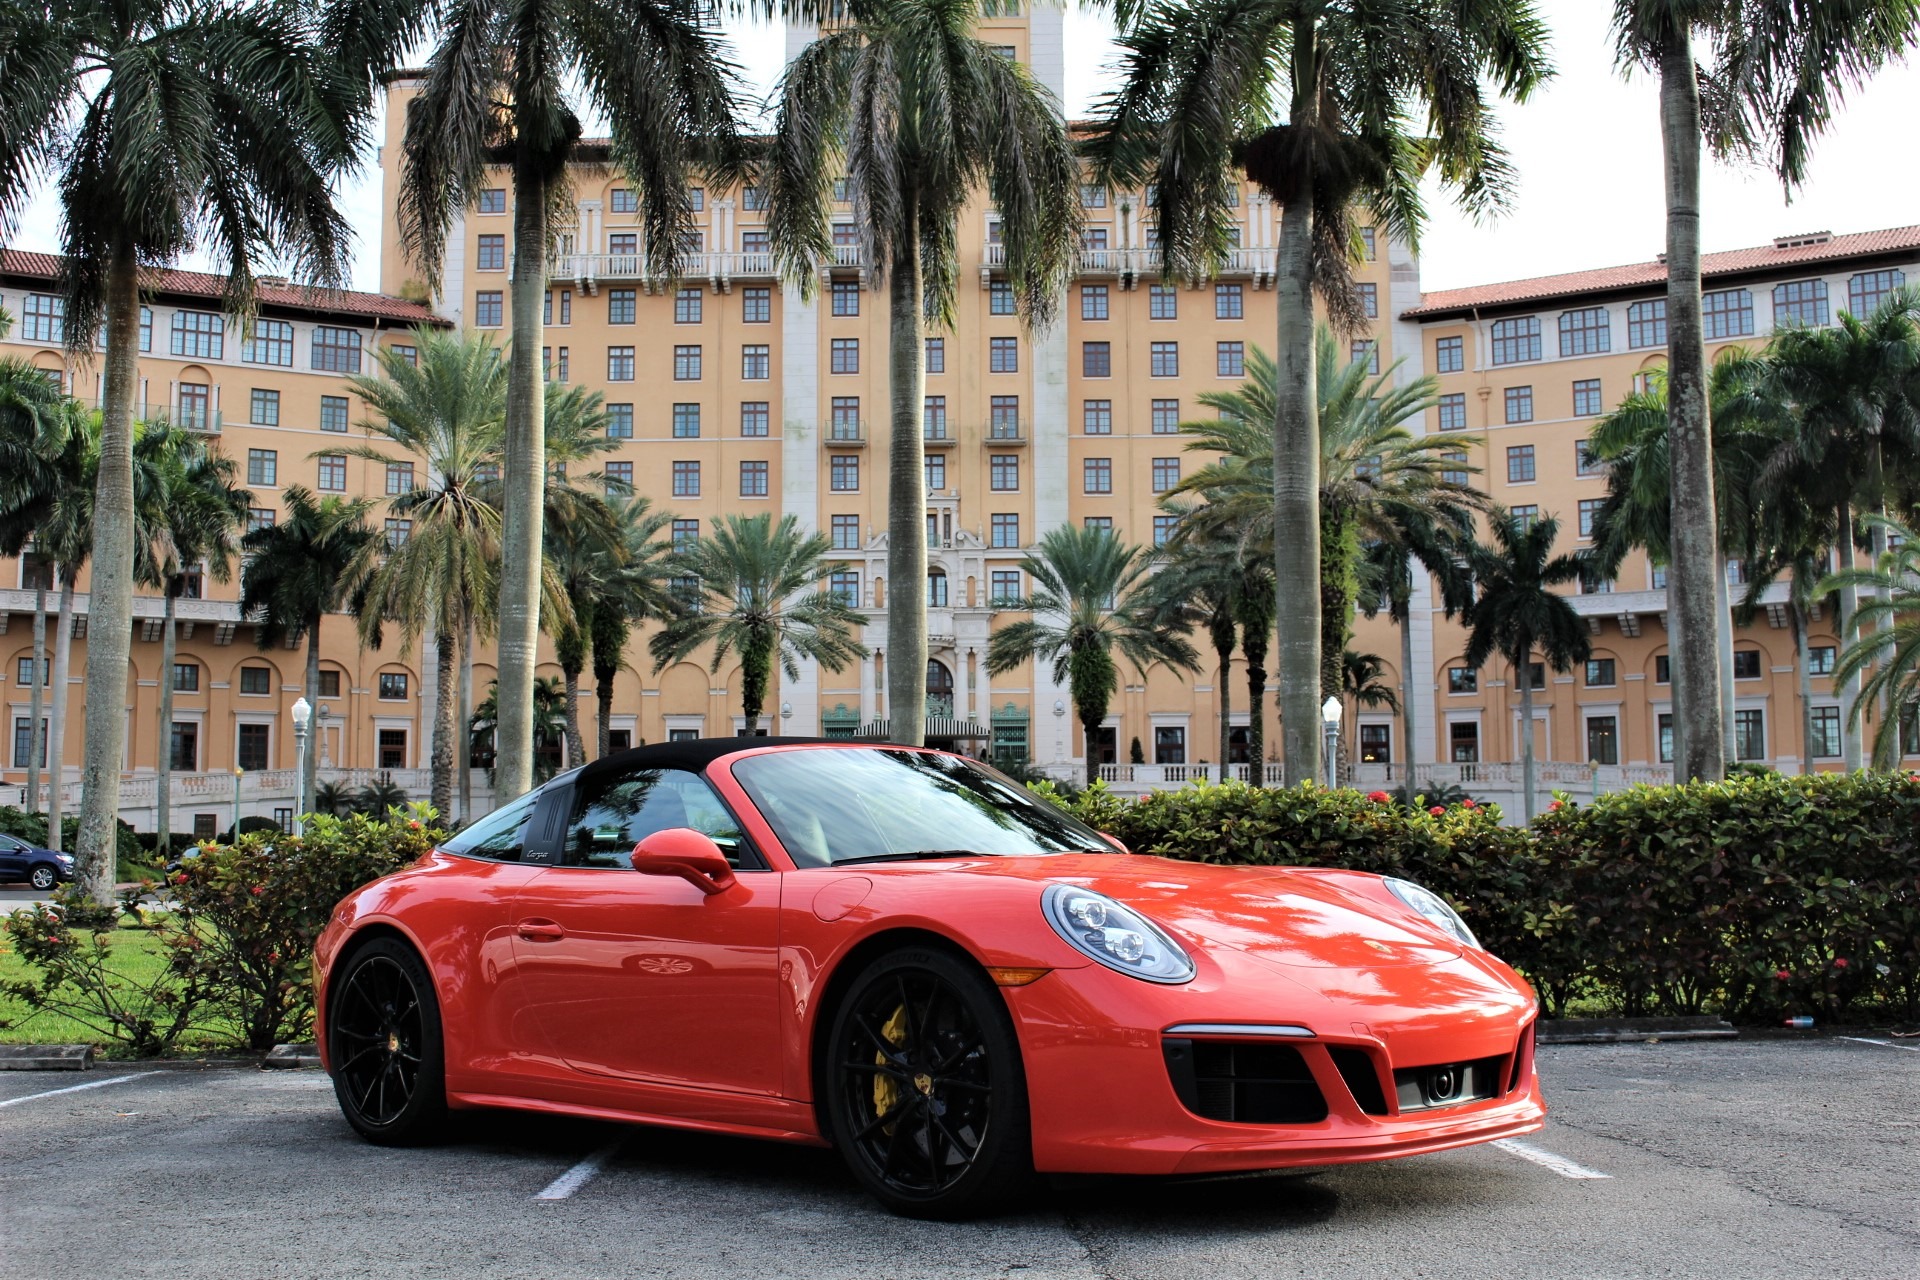 Used 2018 Porsche 911 Targa 4S for sale Sold at The Gables Sports Cars in Miami FL 33146 2